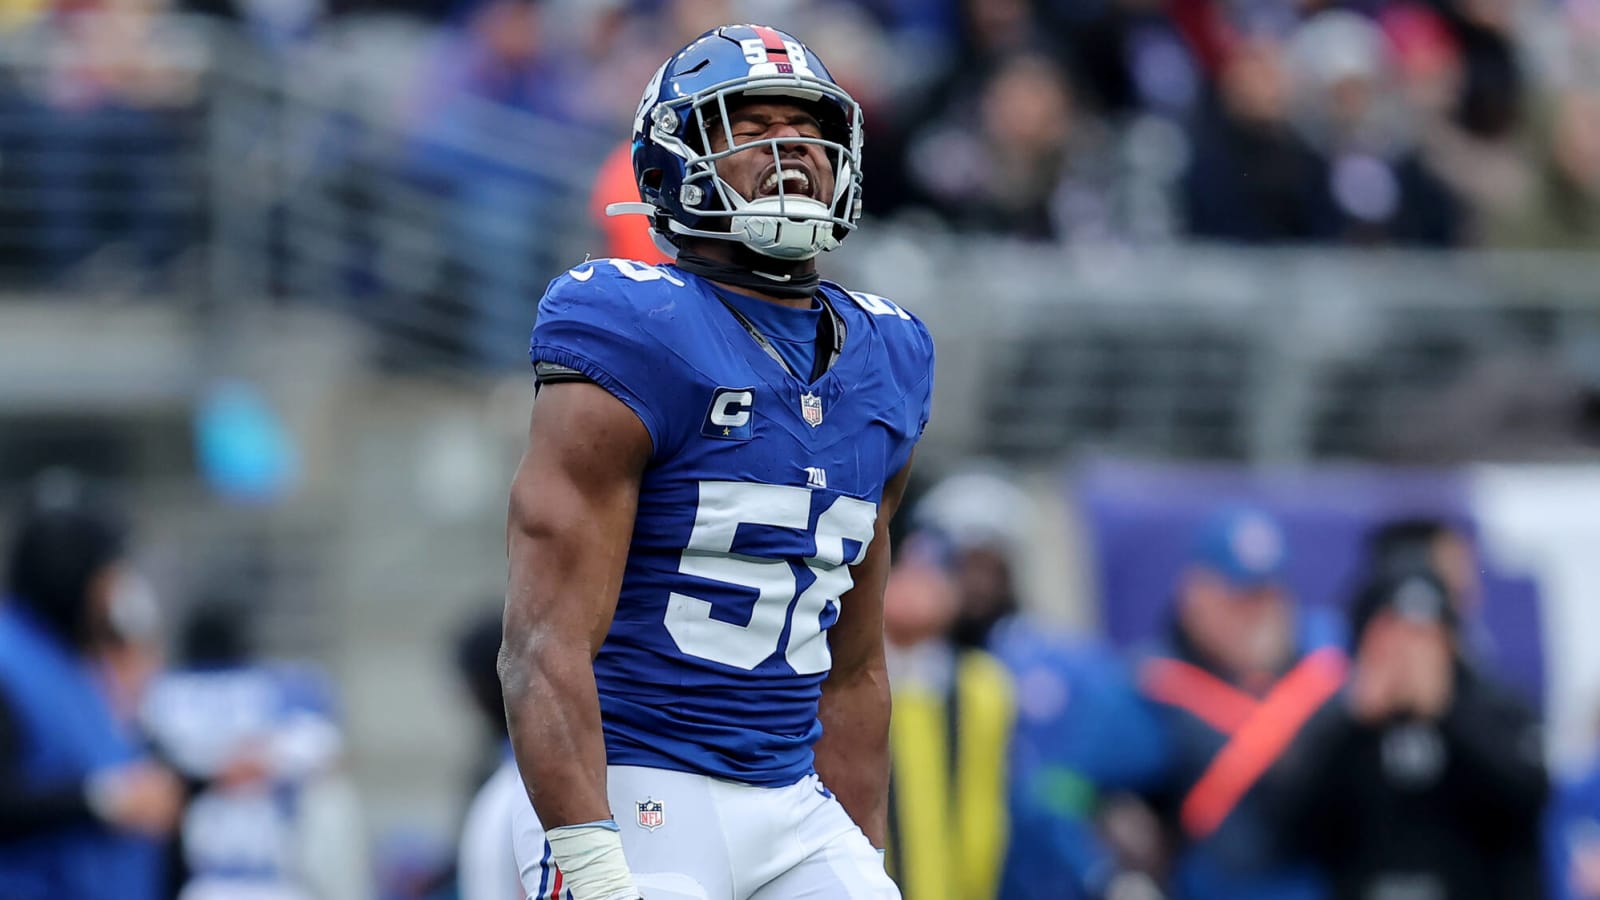 Giants’ star linebacker listed their ‘most underrated’ player by PFF